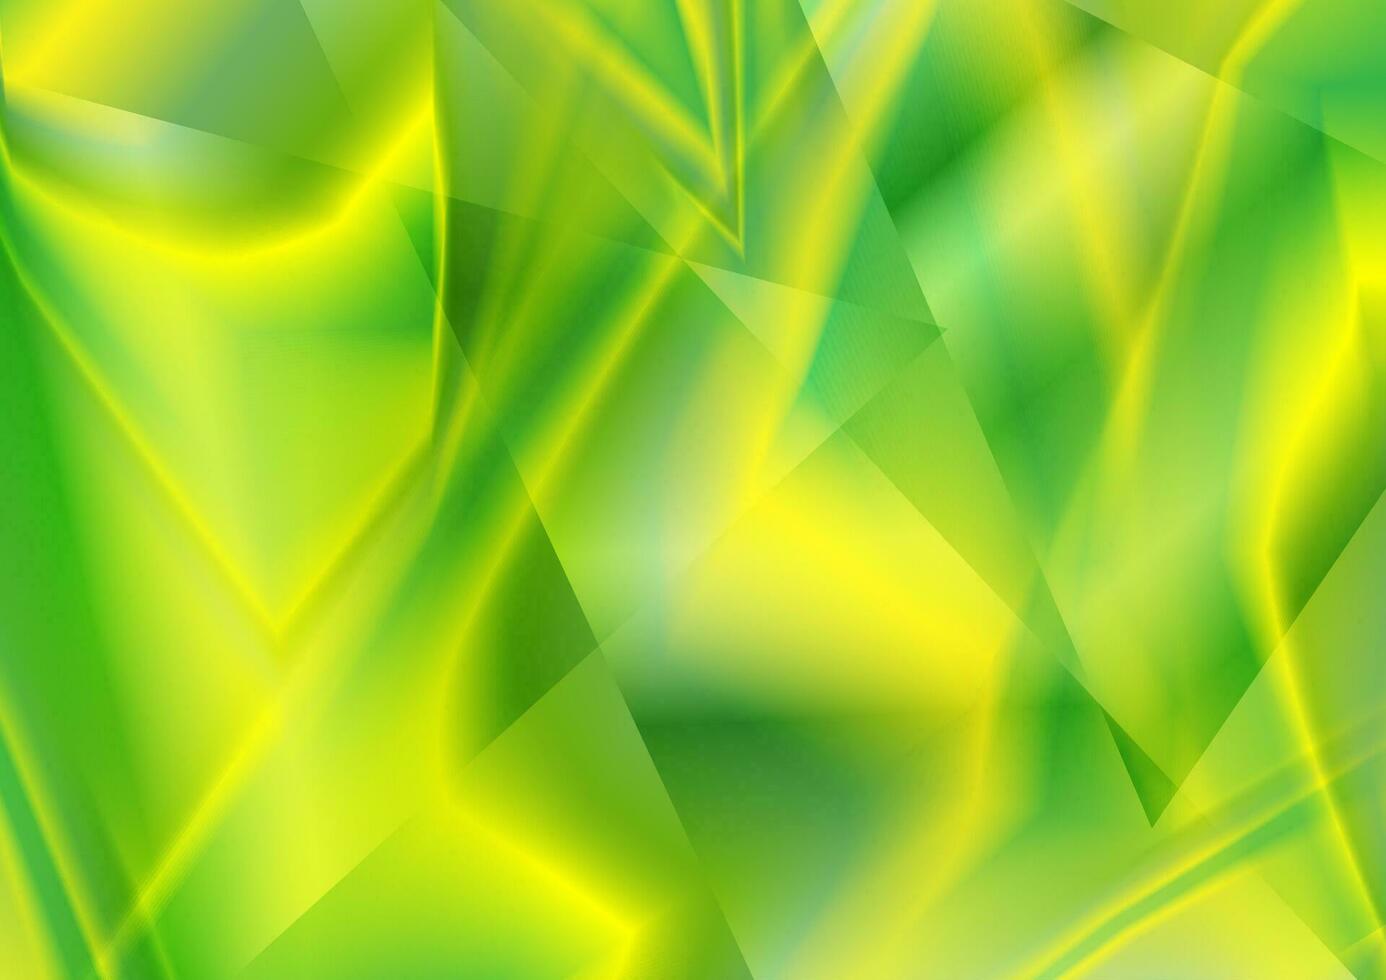 Bright green abstract low poly geometric background vector